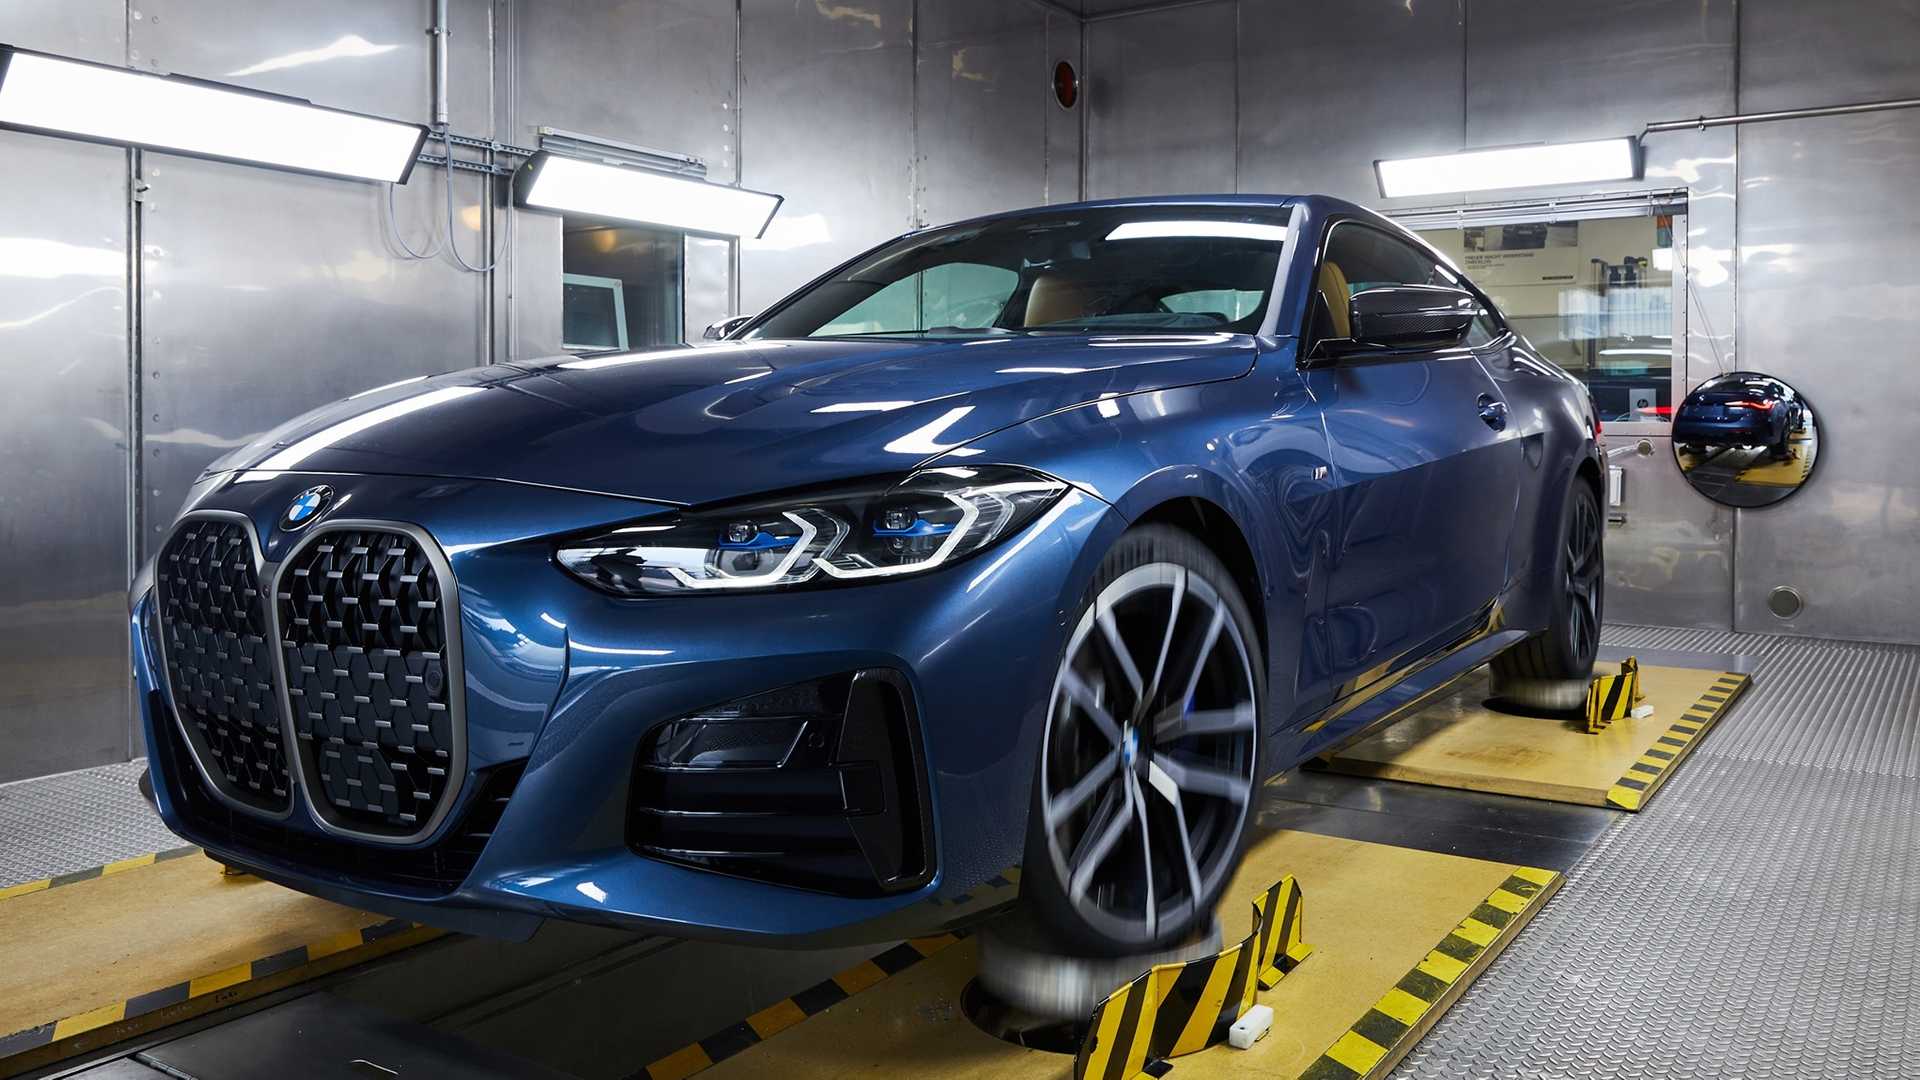 New BMW 4 Series Enters Production, Brings XXL Grille To Assembly Line